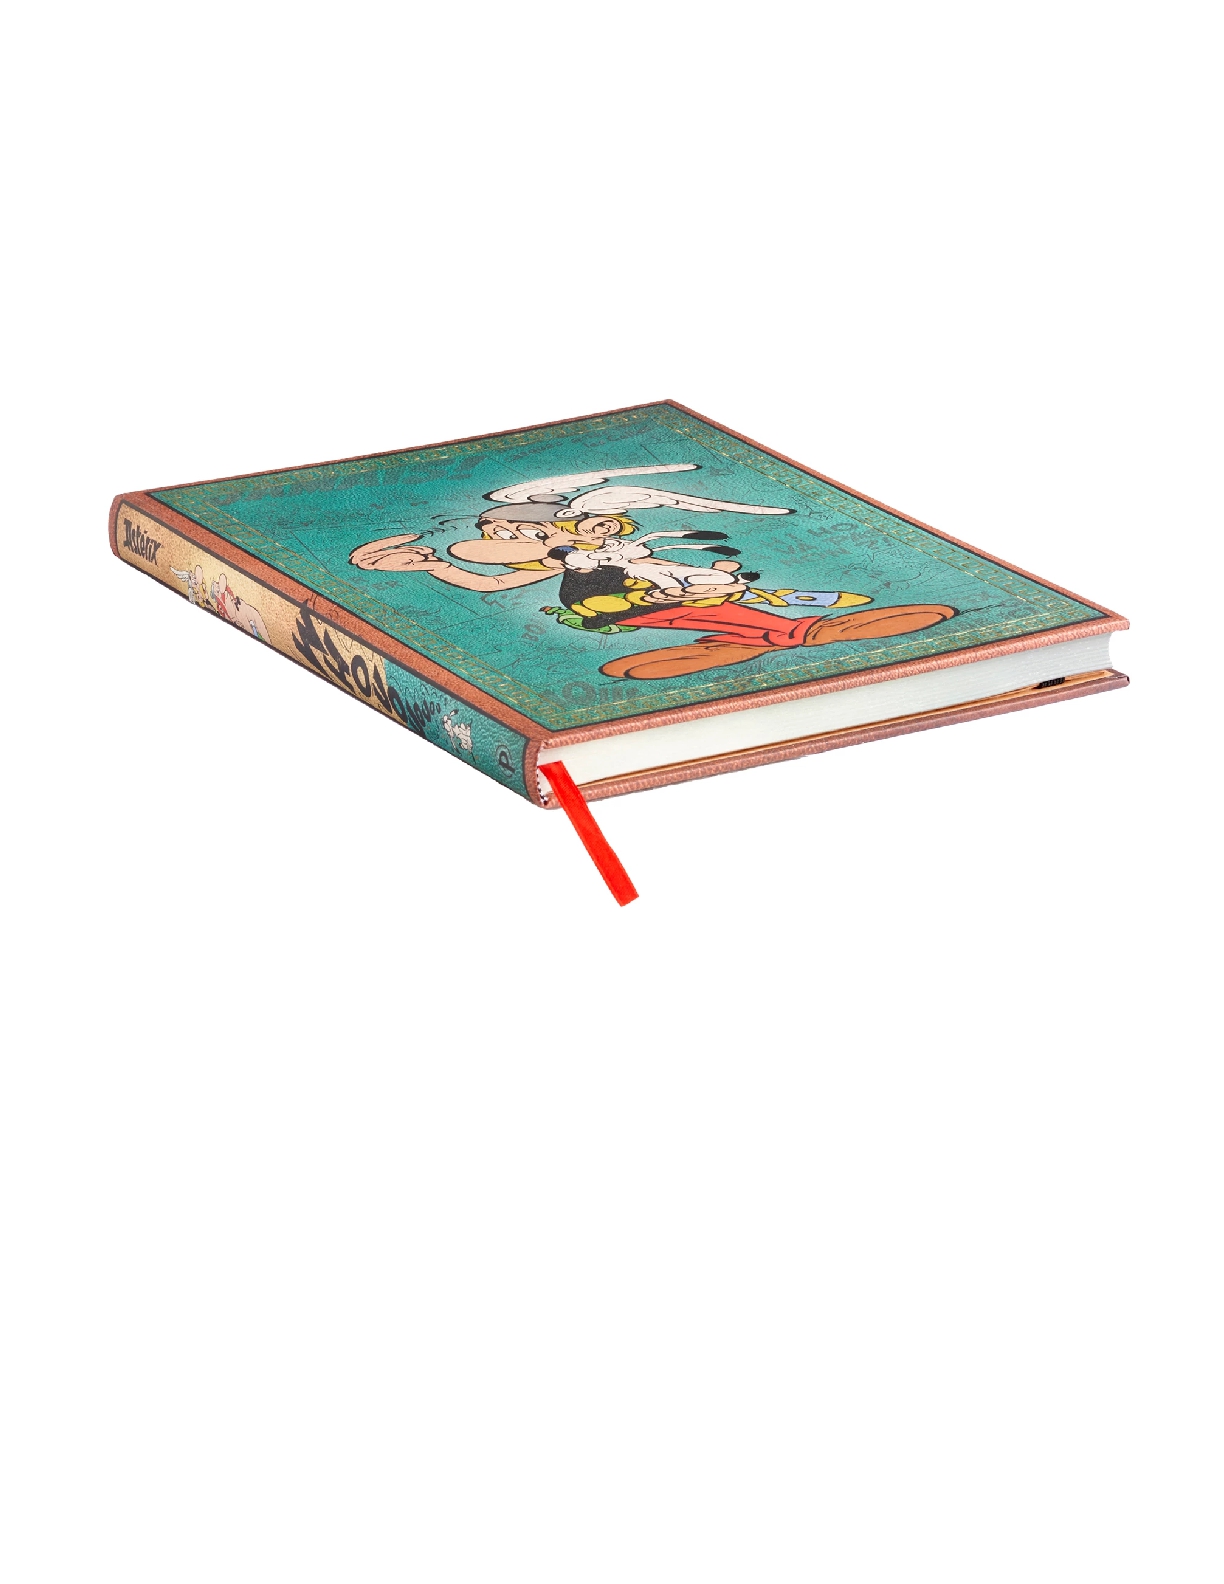 Asterix the Gaul, The Adventures of Asterix, Hardcover Journals, Ultra, Unlined, Elastic Band, 144 Pg, 120 GSM